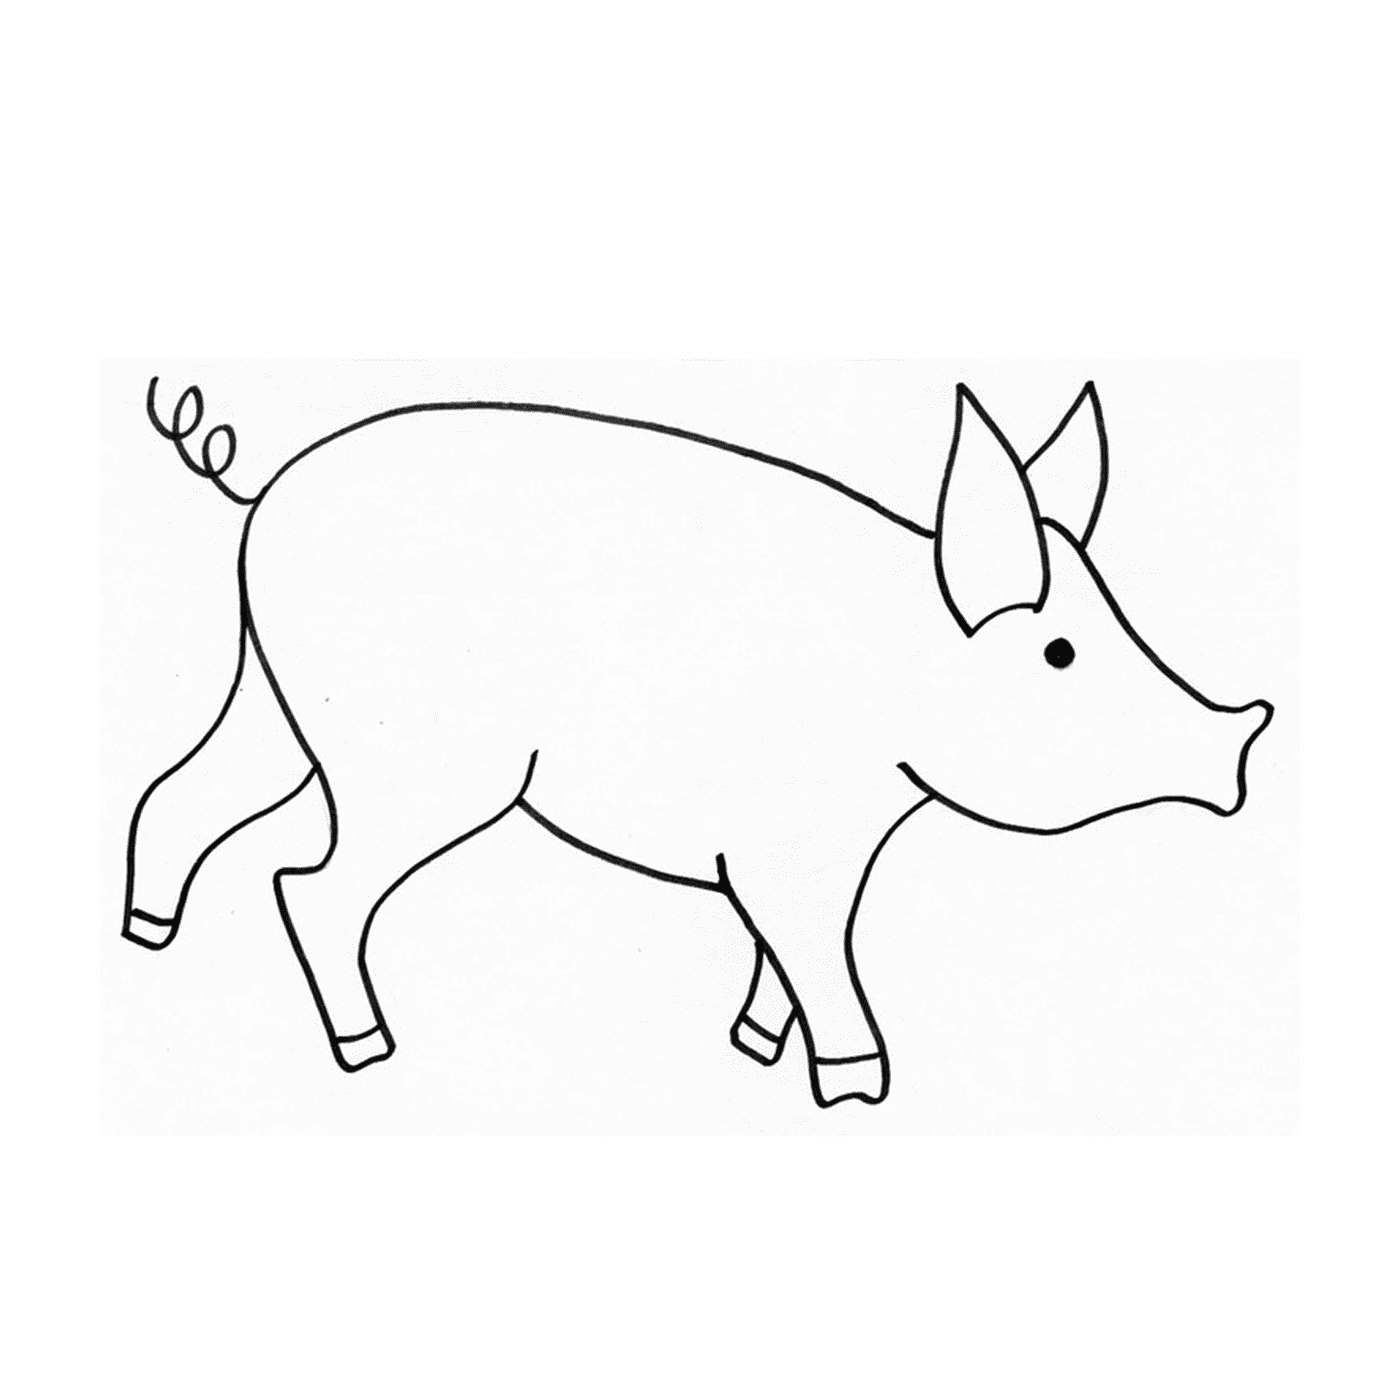  A dwarf pig in a drawing style 